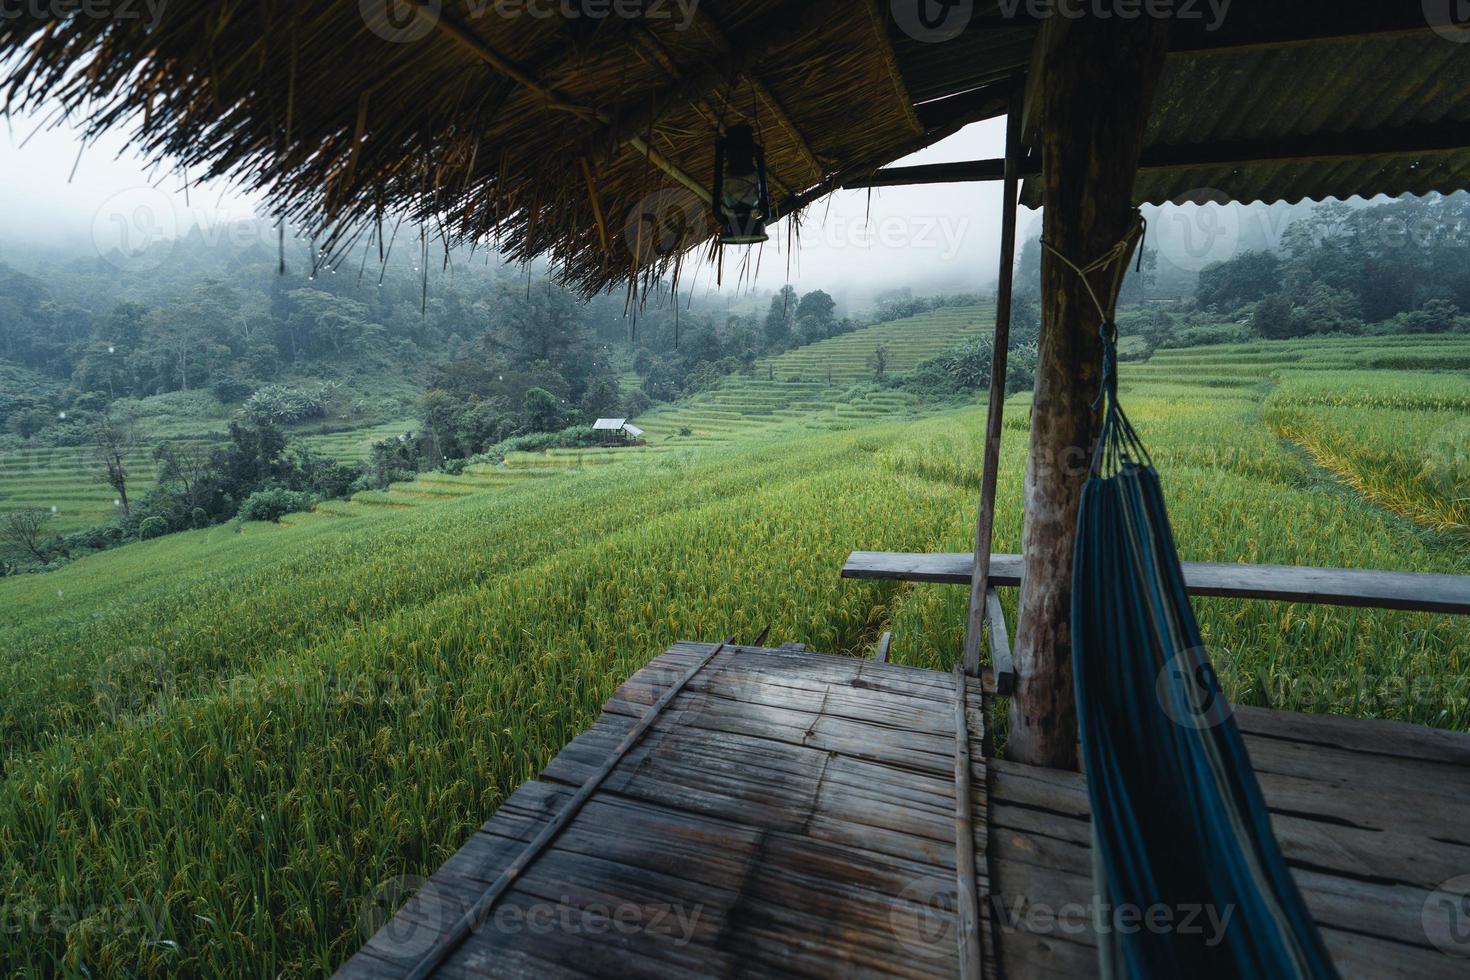 In a wooden hut in a green rice field photo